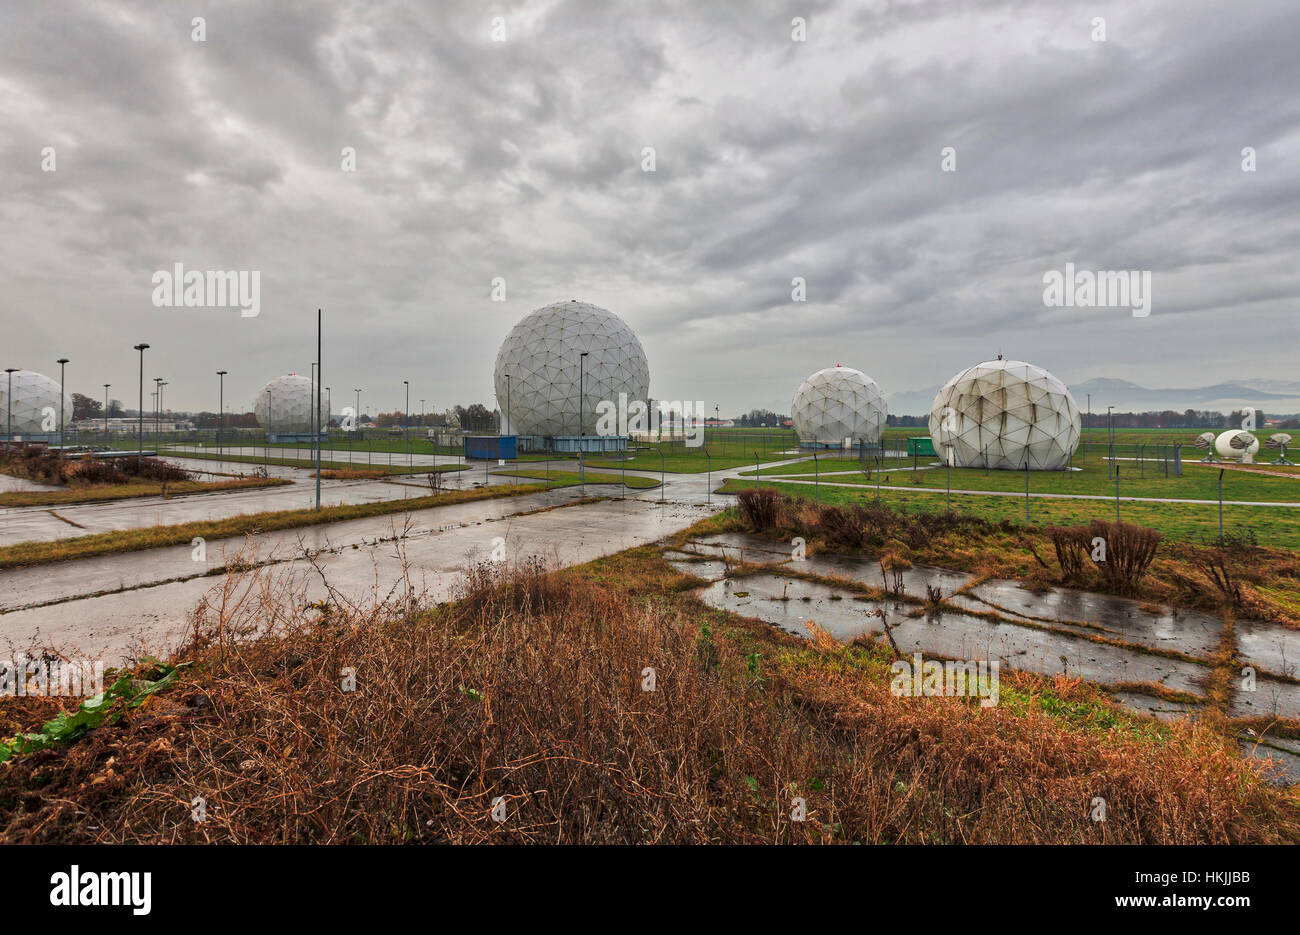 Radar Dome against cloudy sky at Bad Aibling Station, Bavaria, Germany Stock Photo